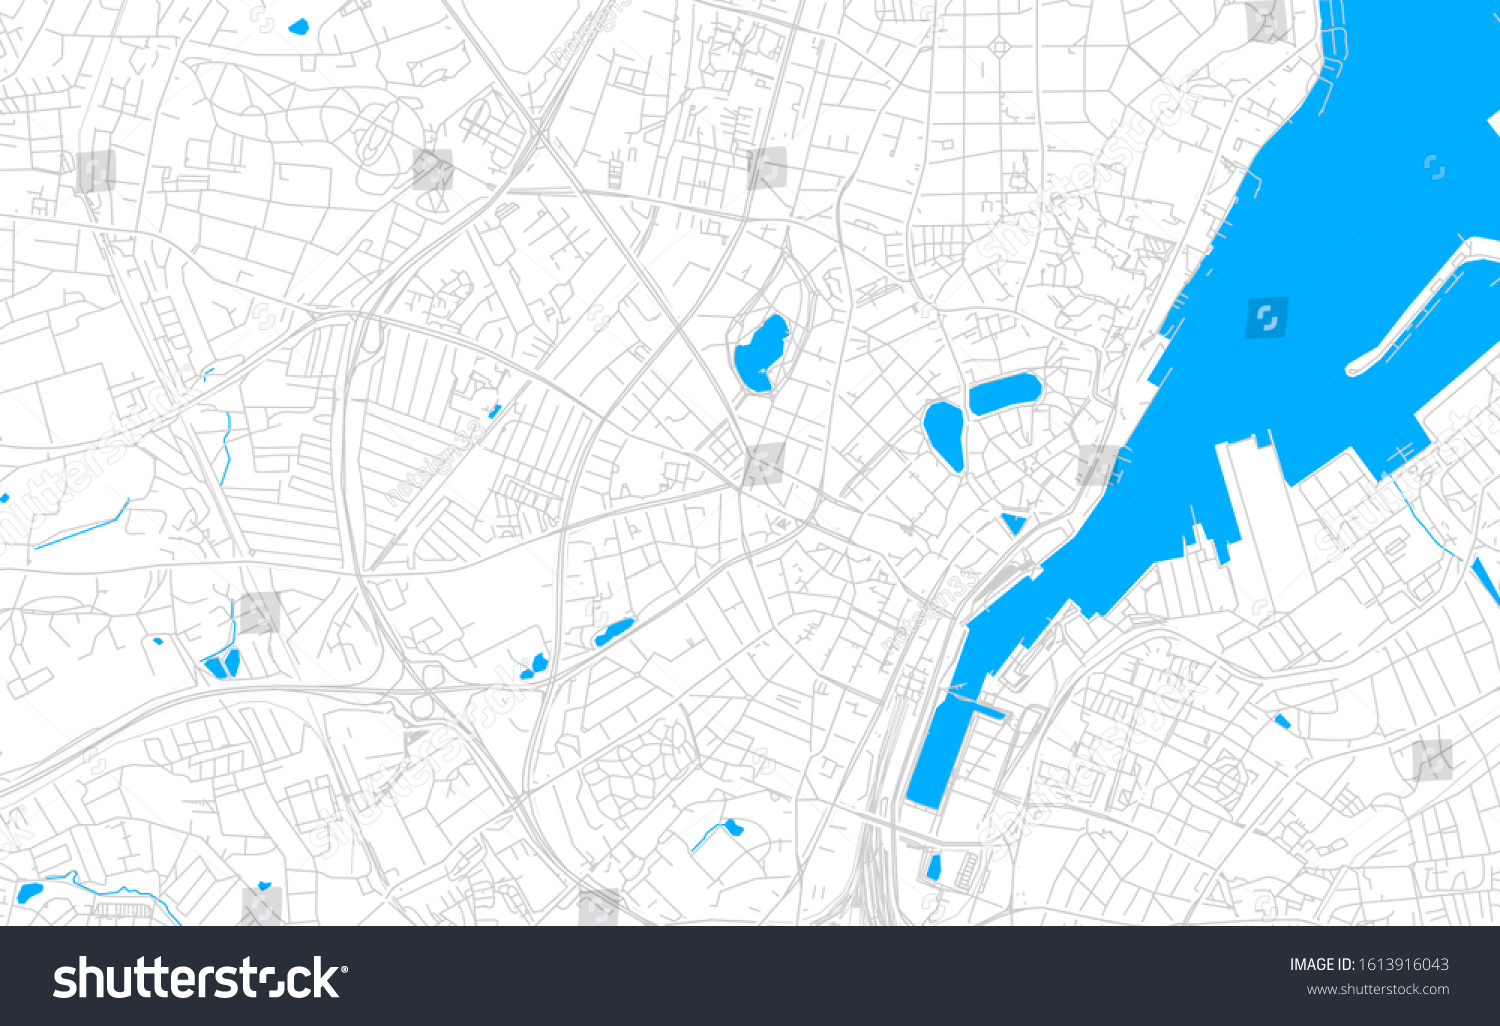 SVG of Bright vector map of Kiel, Germany with fine tuning between road and water. Use this map as a background for your company or as a high-quality interior design. svg